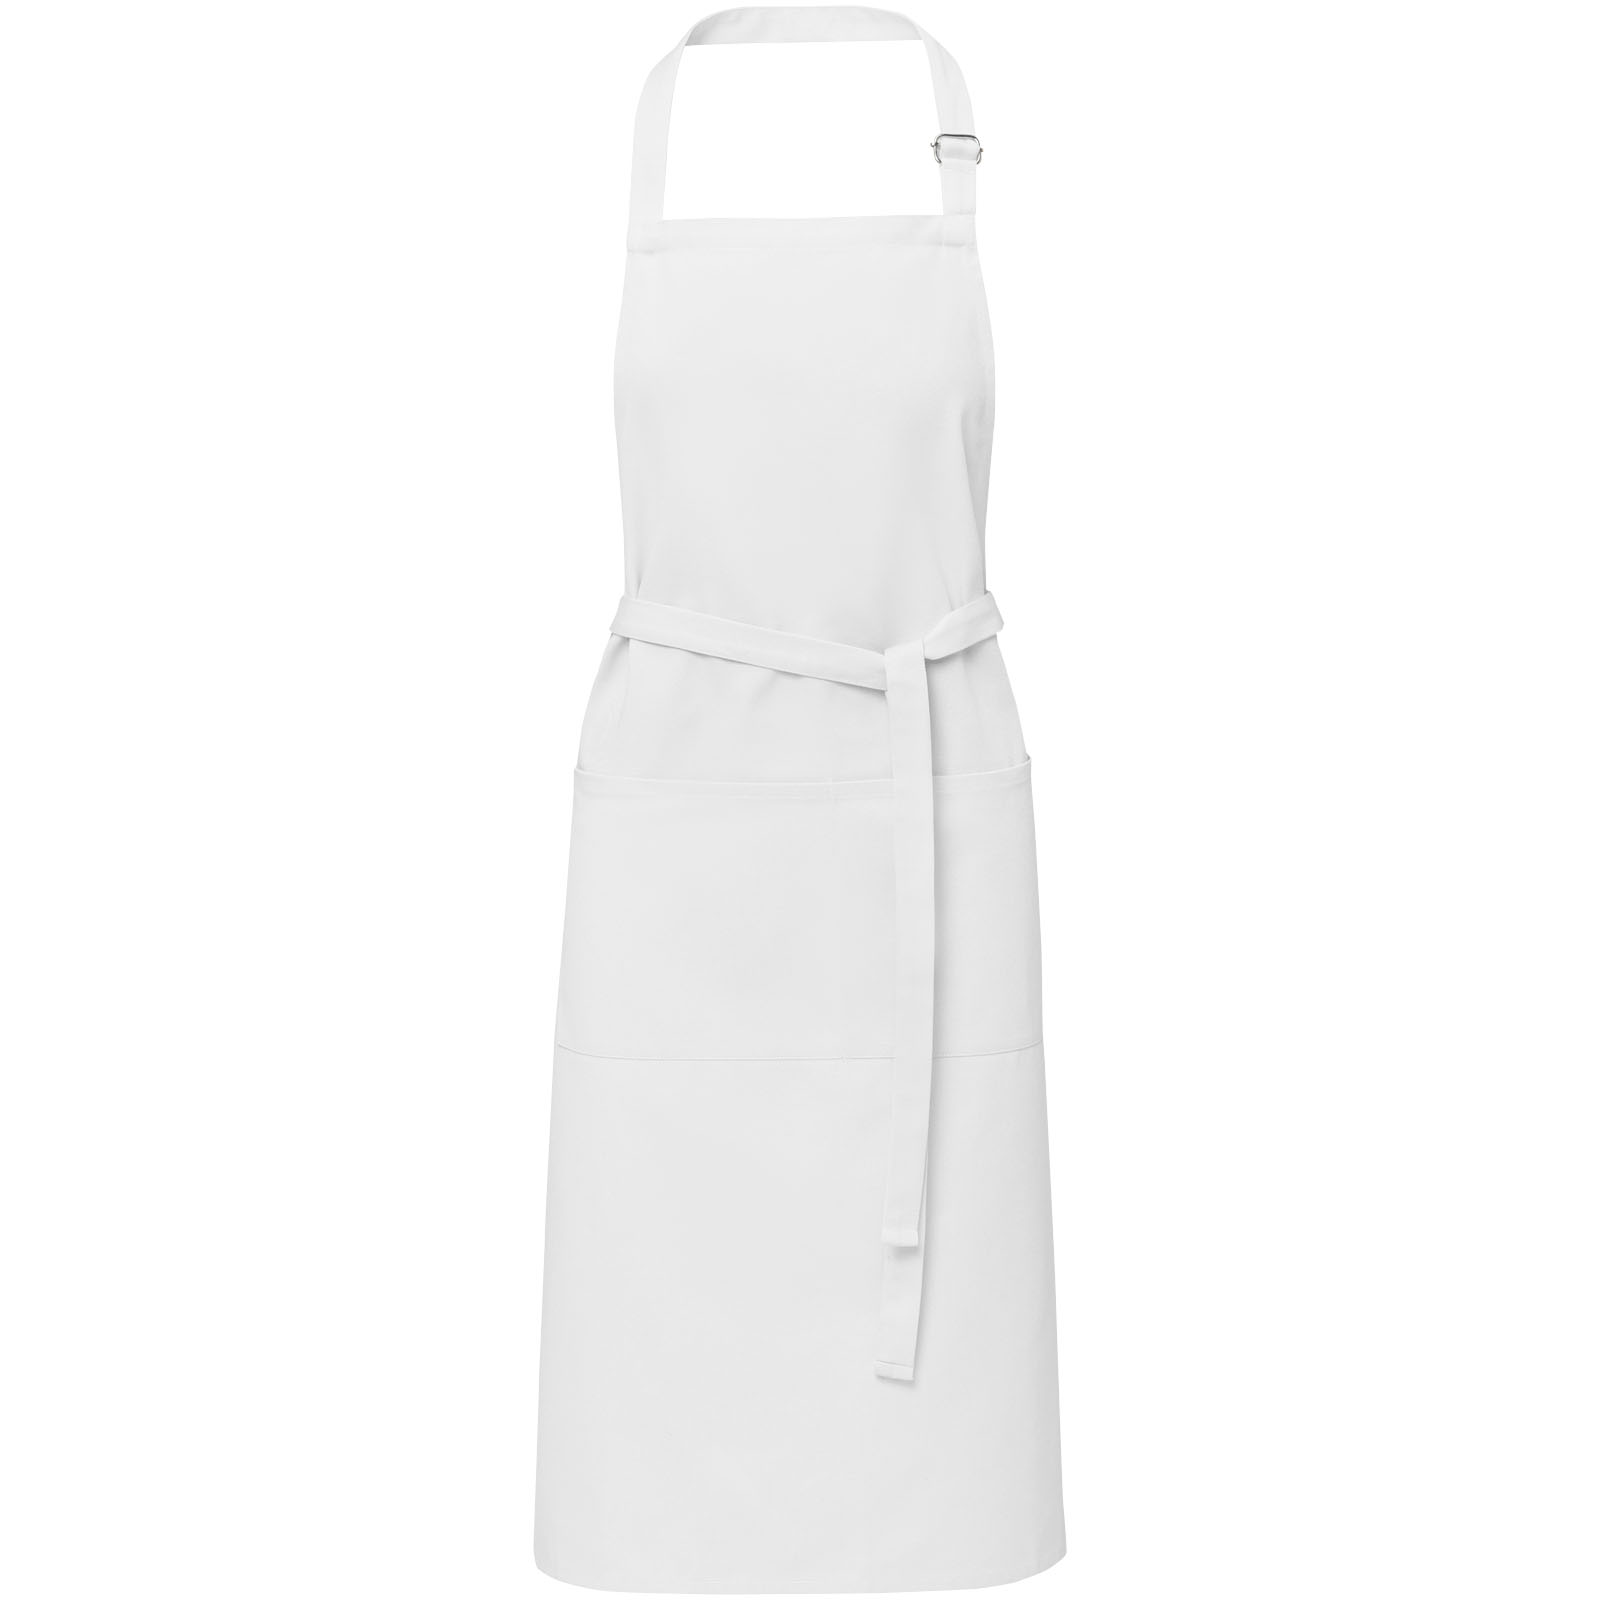 Home & Kitchen - Andrea 240 g/m² apron with adjustable neck strap